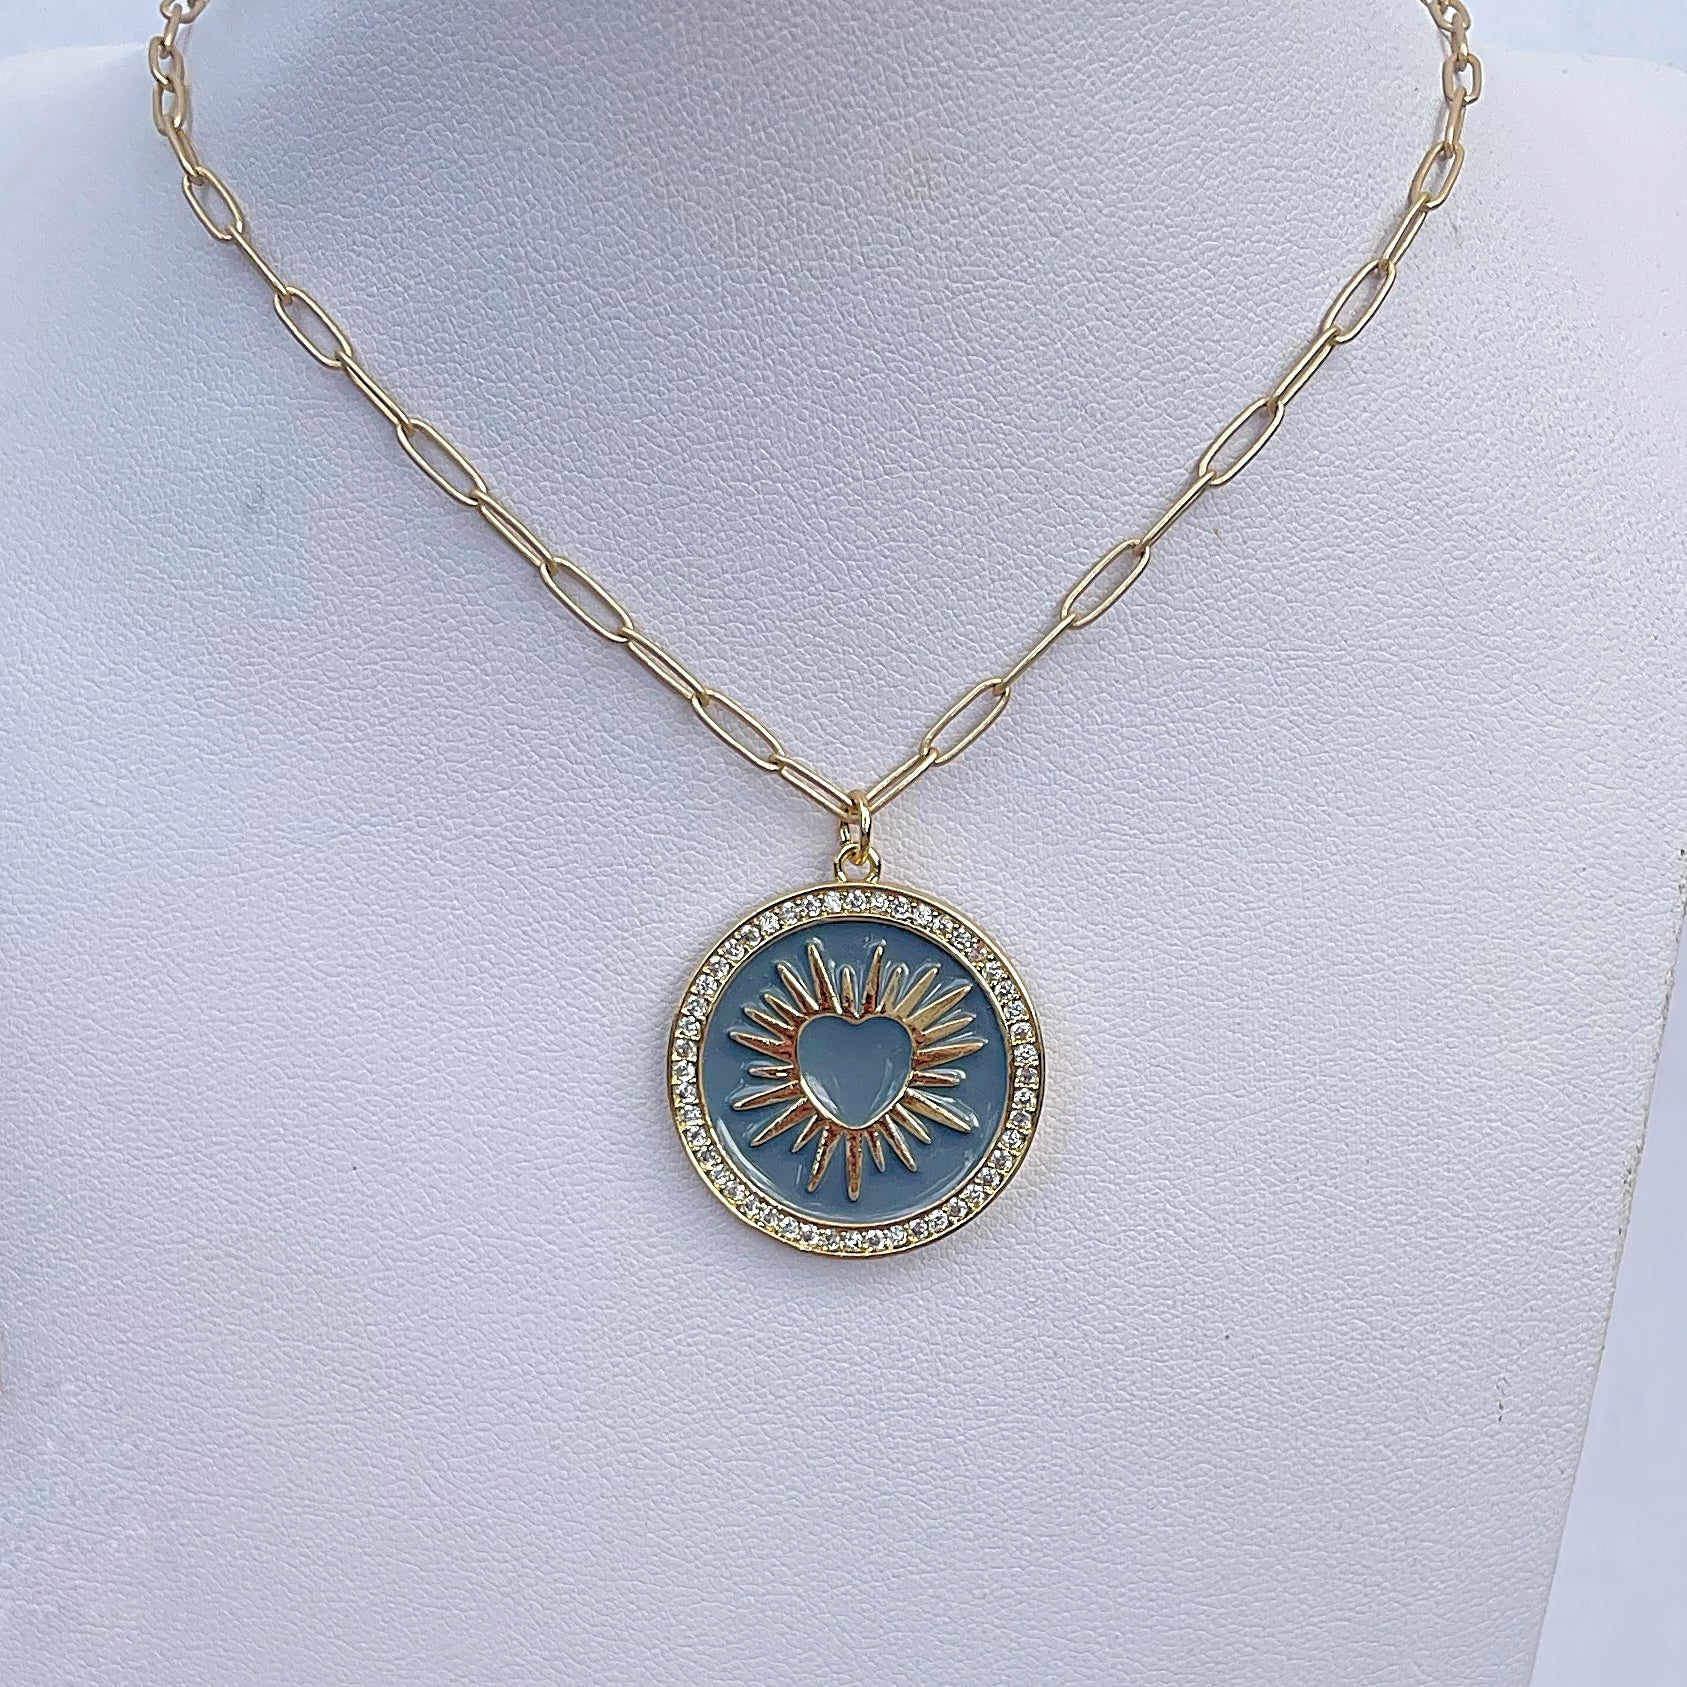 “Heart on Fire” Necklace in blue